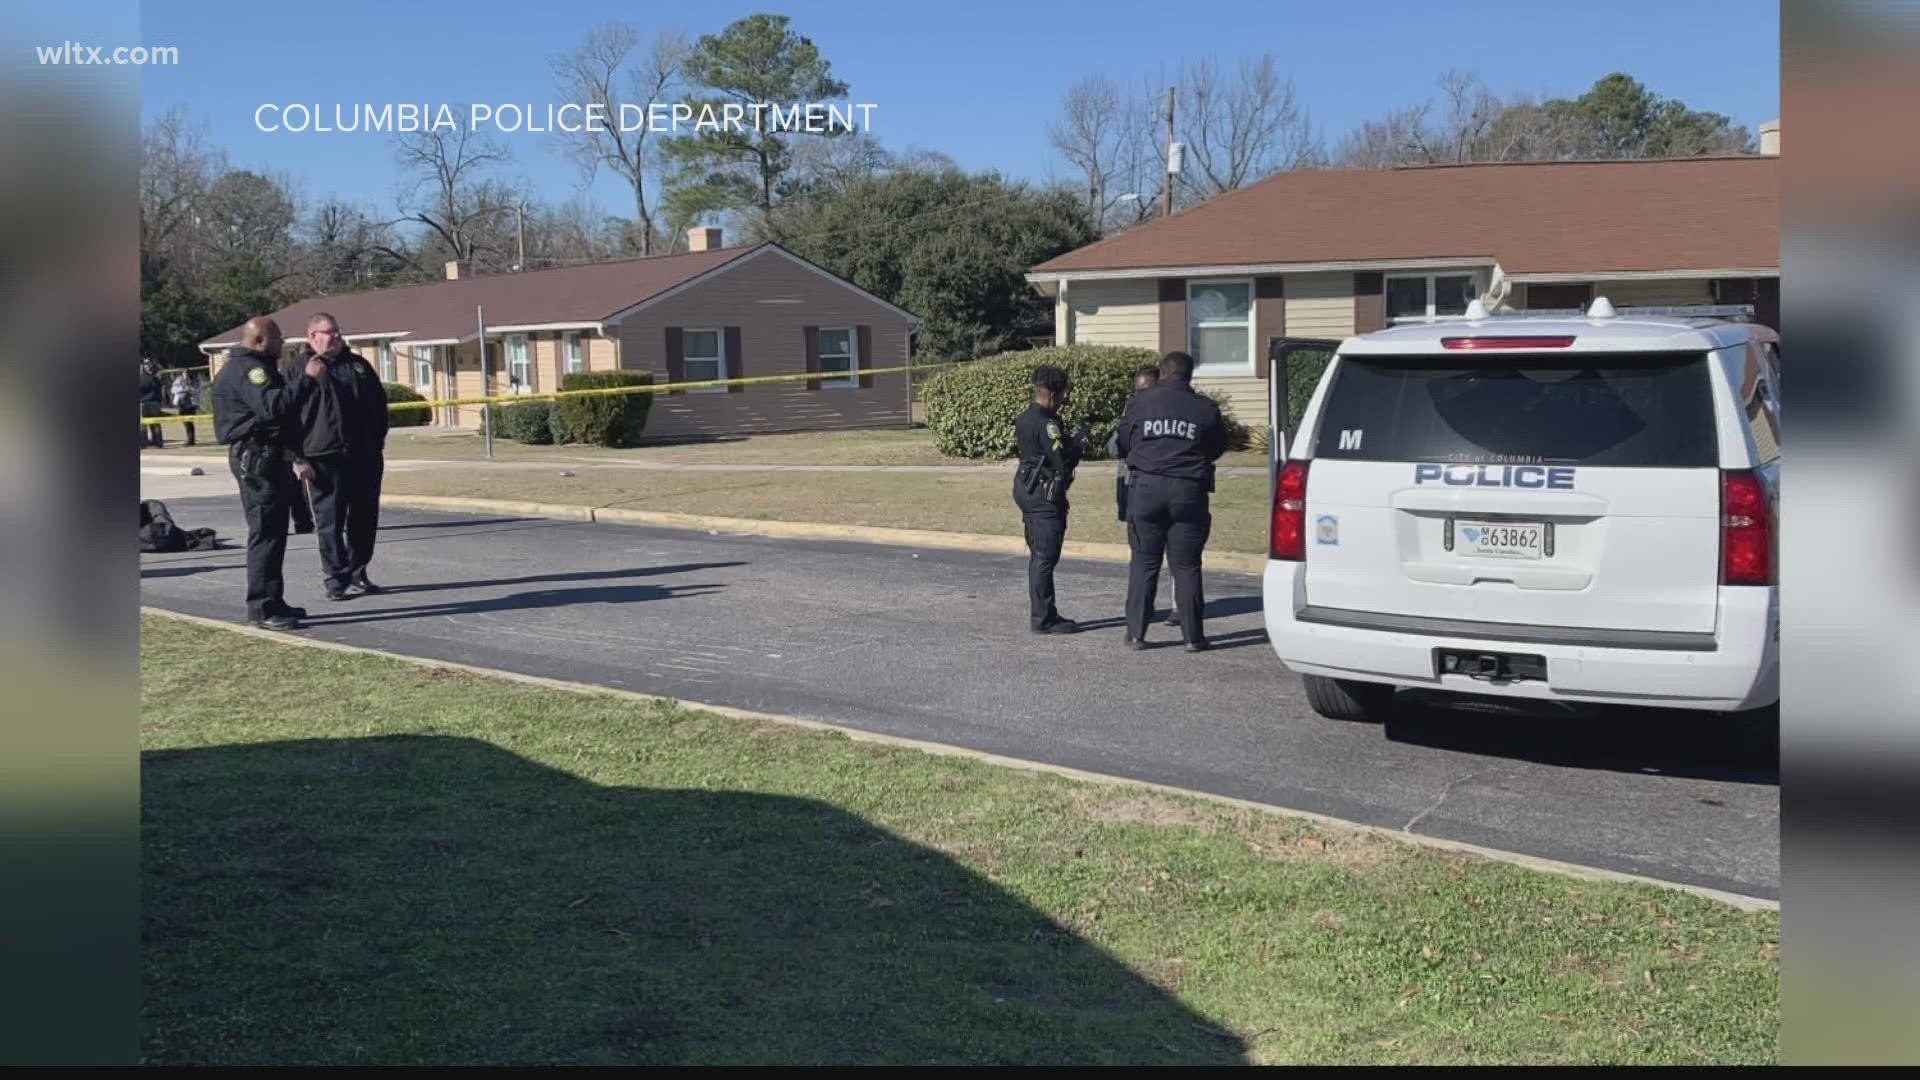 Two people have been arrested in connection to a fatal shooting of a woman on Tuesday at a Columbia apartment complex, according to the Columbia Police Department.